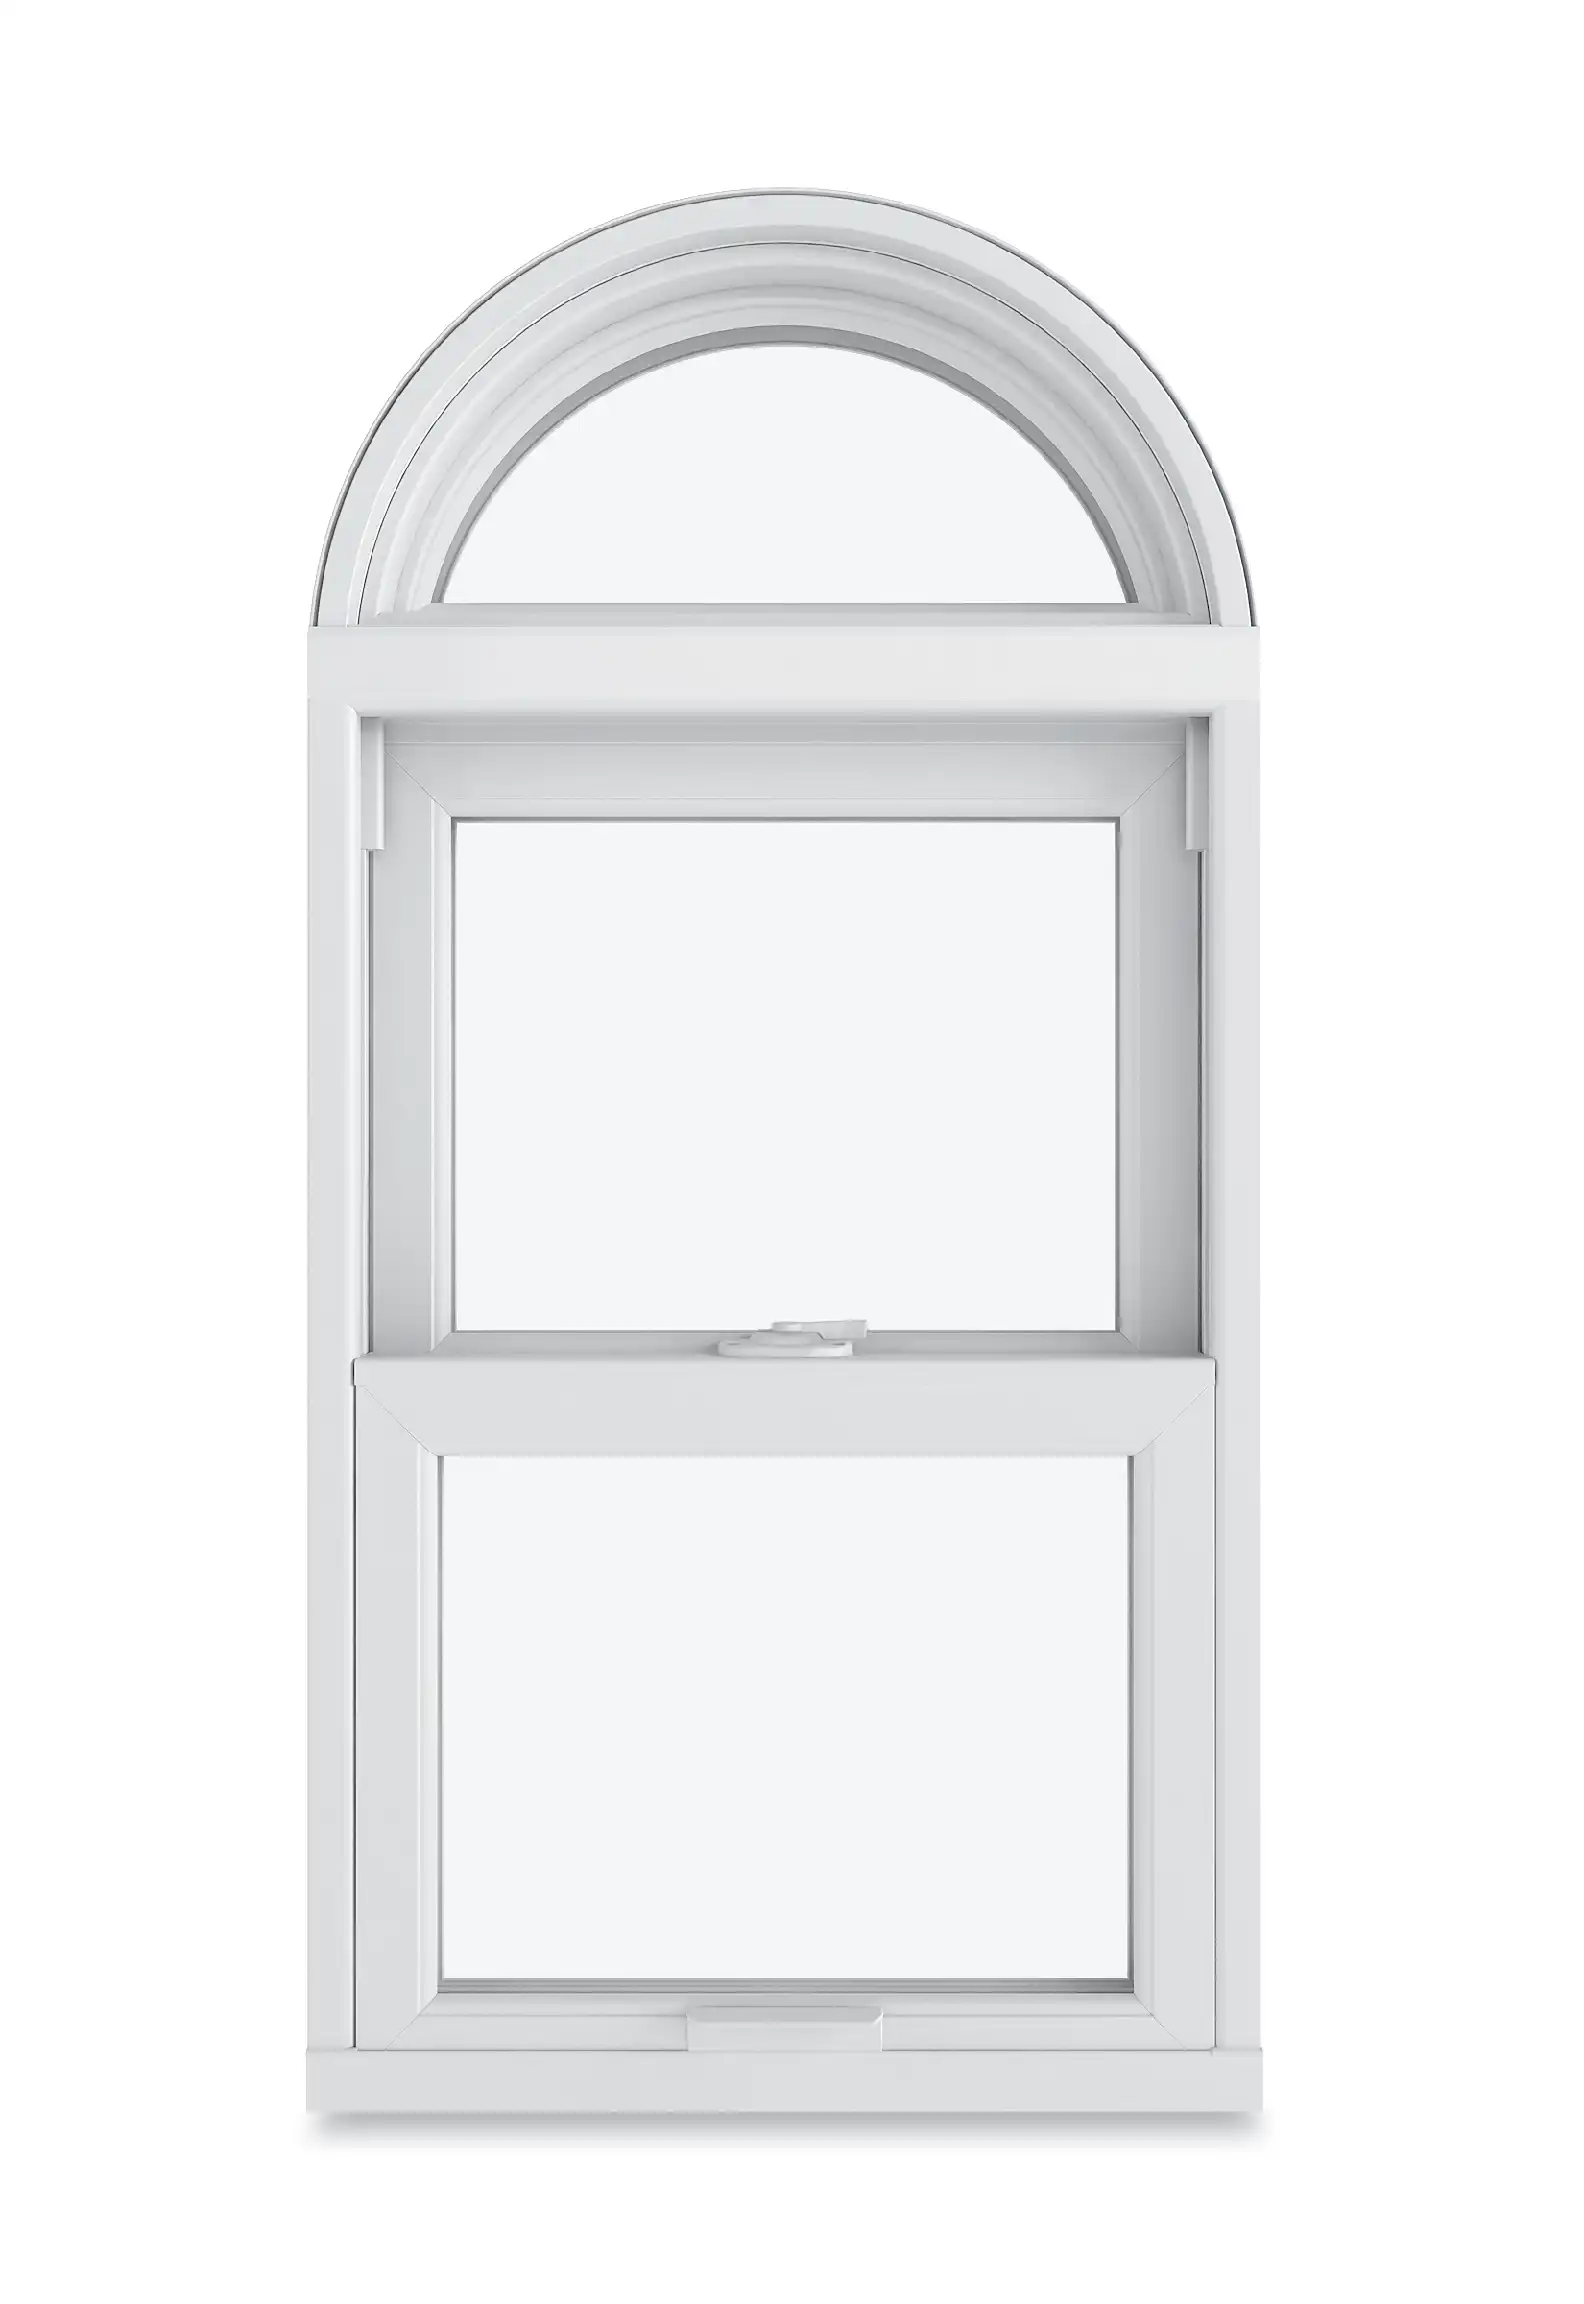 Image of a Marvin Replacement Double Hung window with a Round Top Mull.